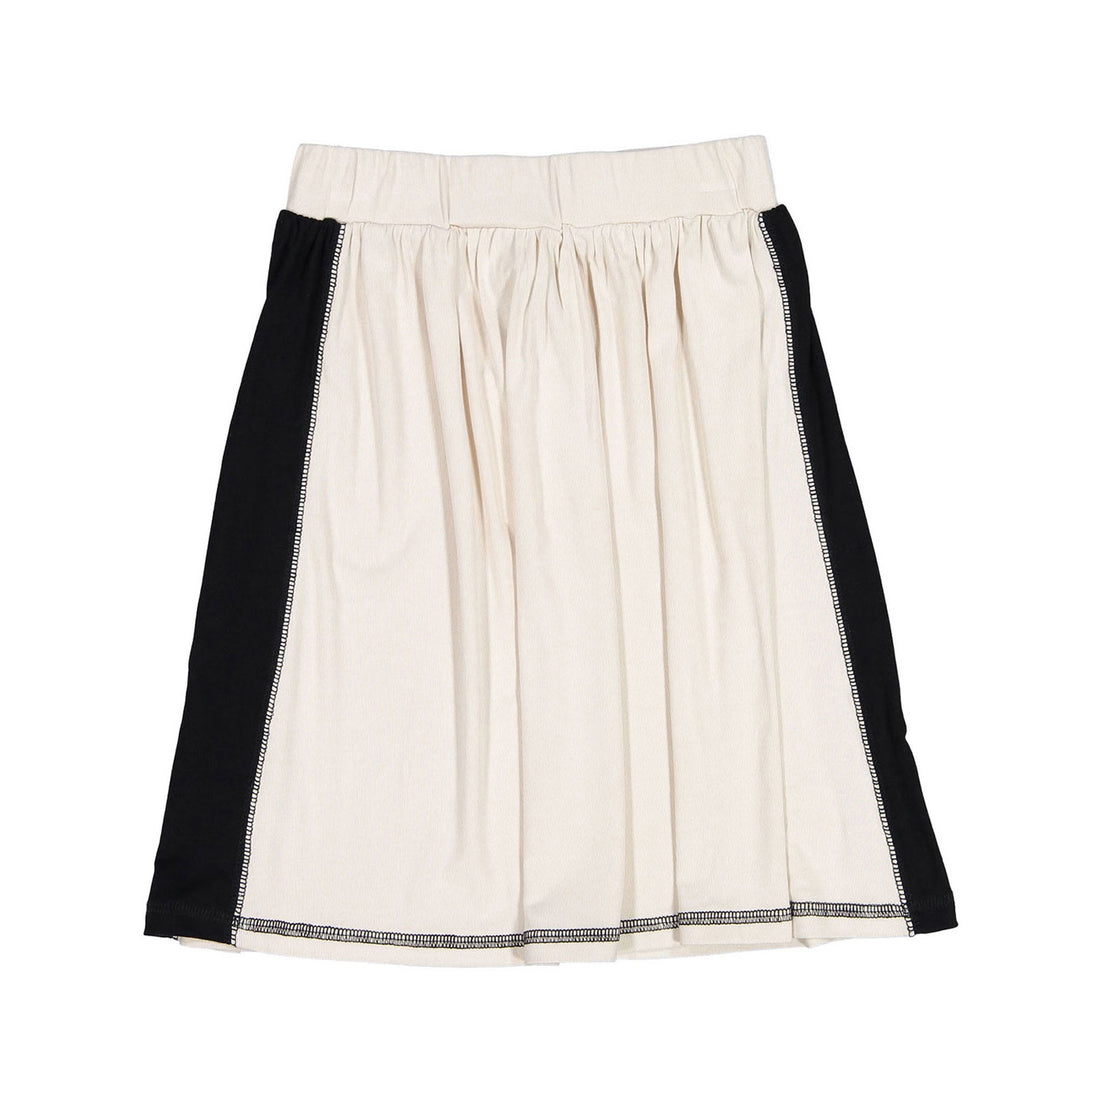 L by Ladida Cream + Black Girl Contrast Skirt